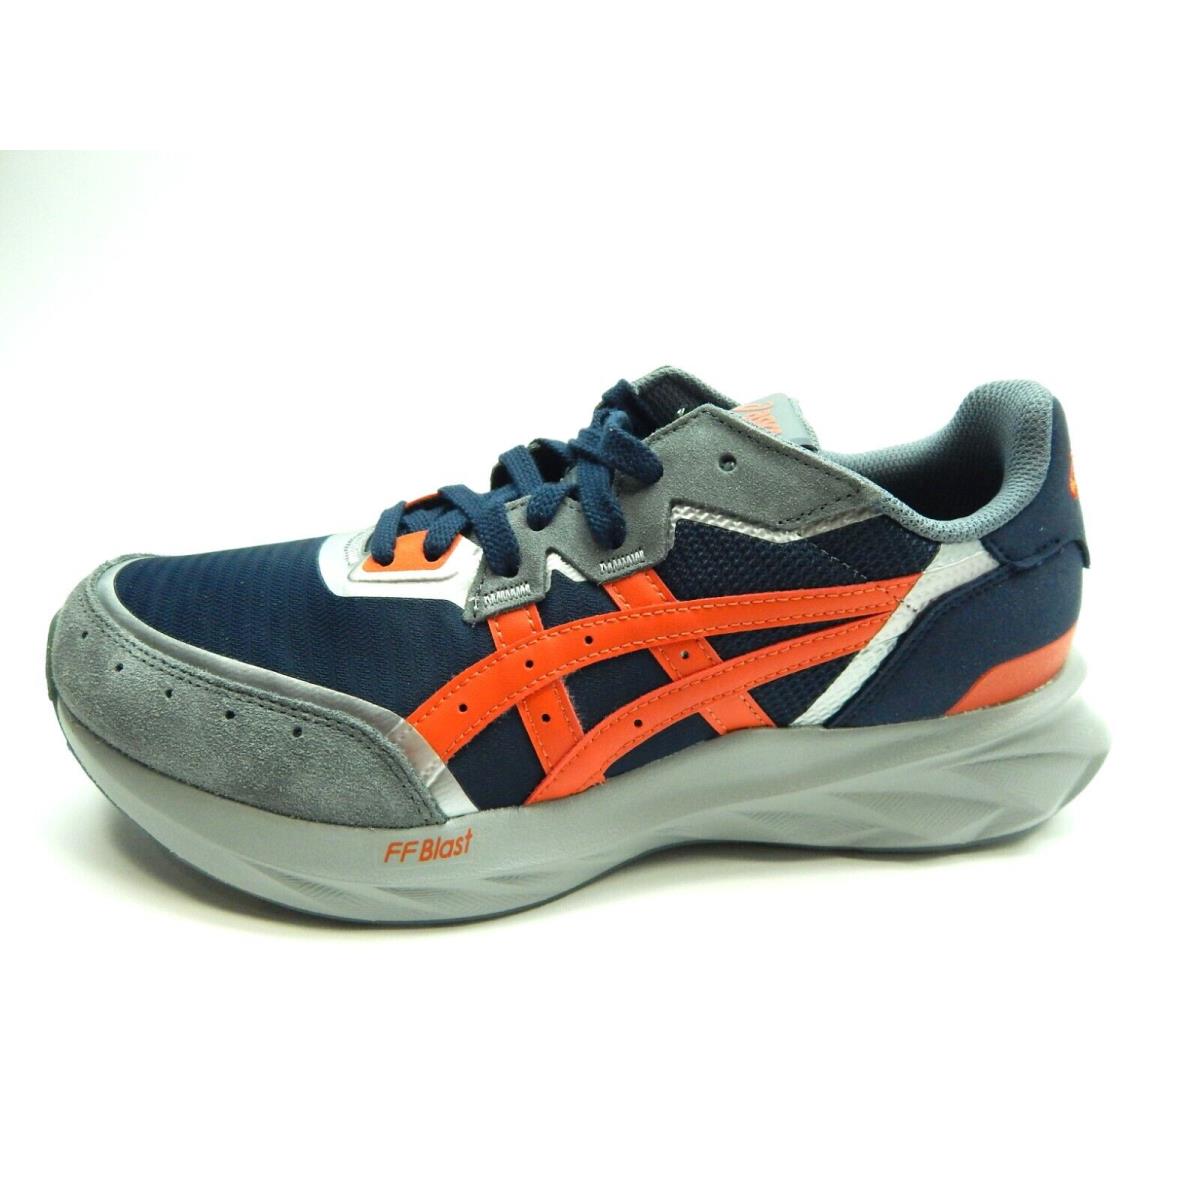 Asics Tarther Blast Midnight Red Clay Ortholite Comfort 1201A439-400 Men Shoes